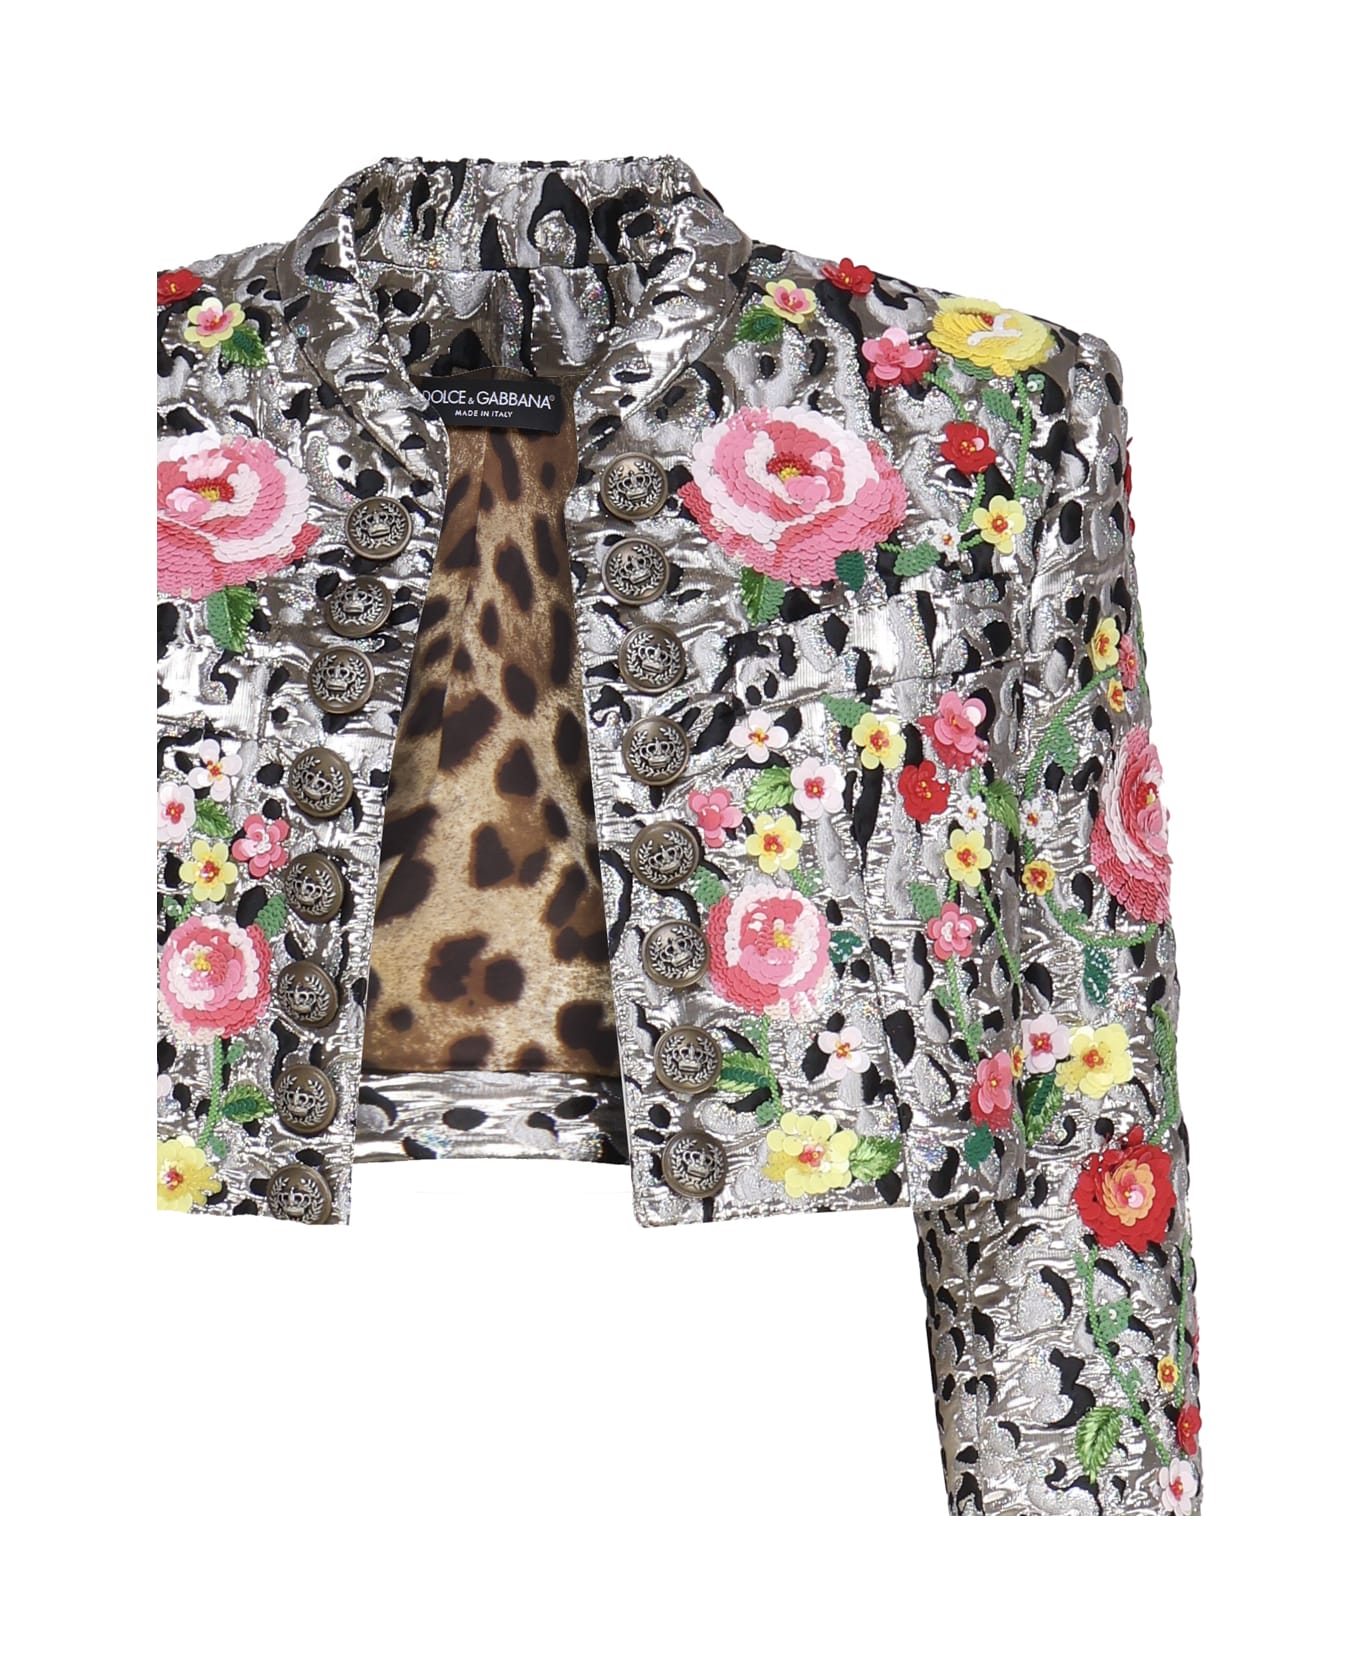 Dolce & Gabbana Jacket With Animal Print And Flowers - Multicolor ジャケット